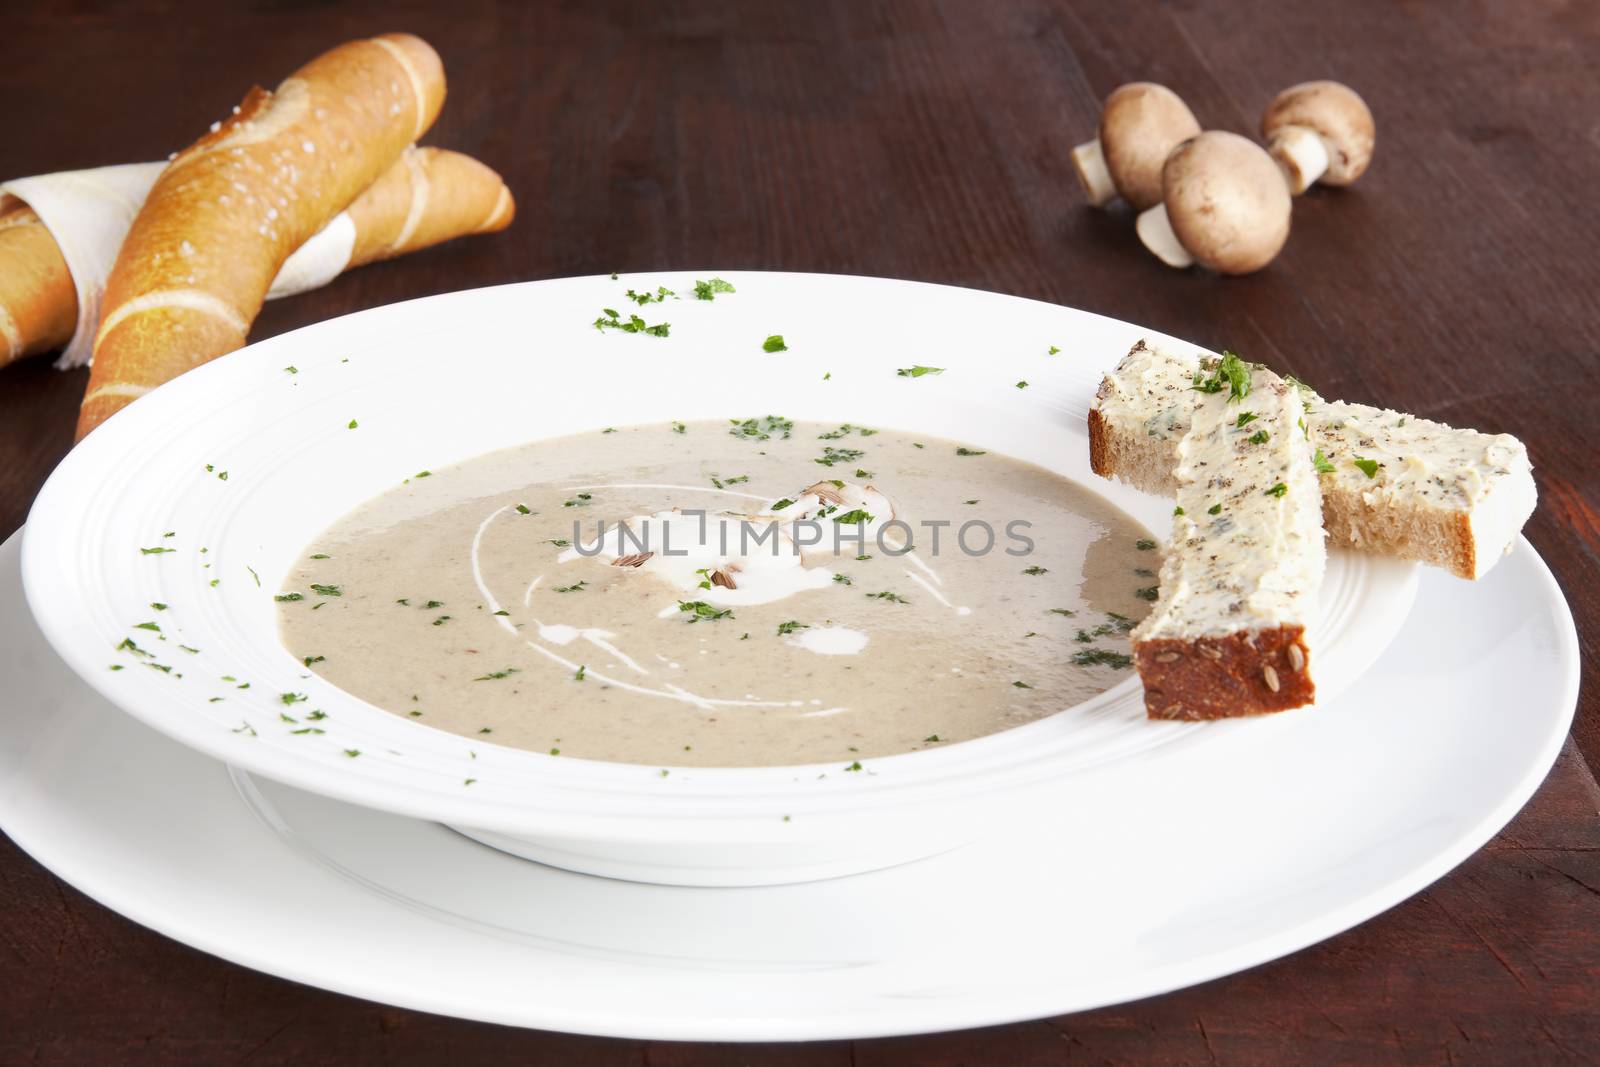 Champignon mushroom cream soup in white plate with pastry on dark wooden background. Culinary eating.